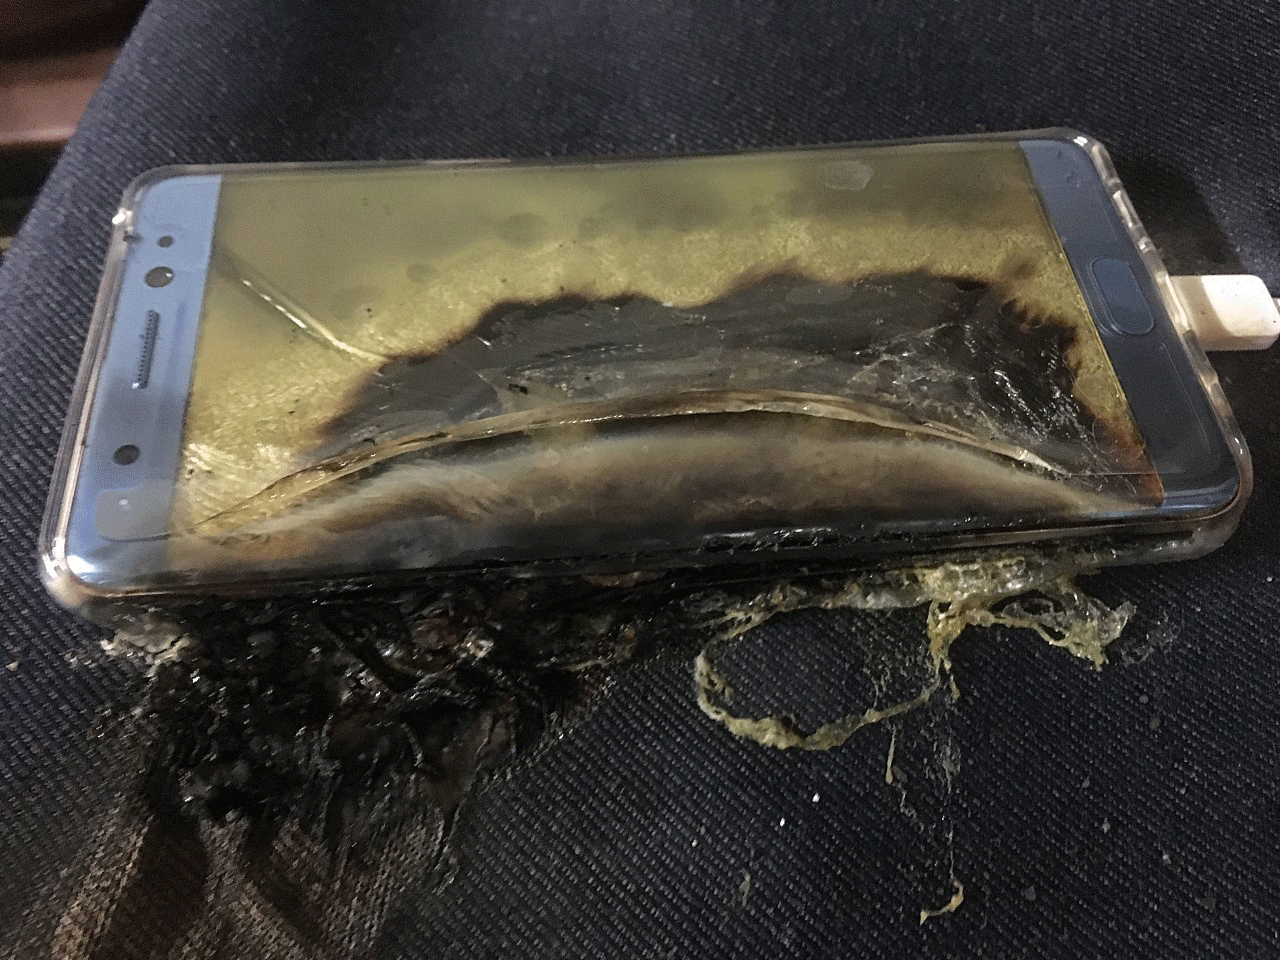 The Note 7 is still causing trouble